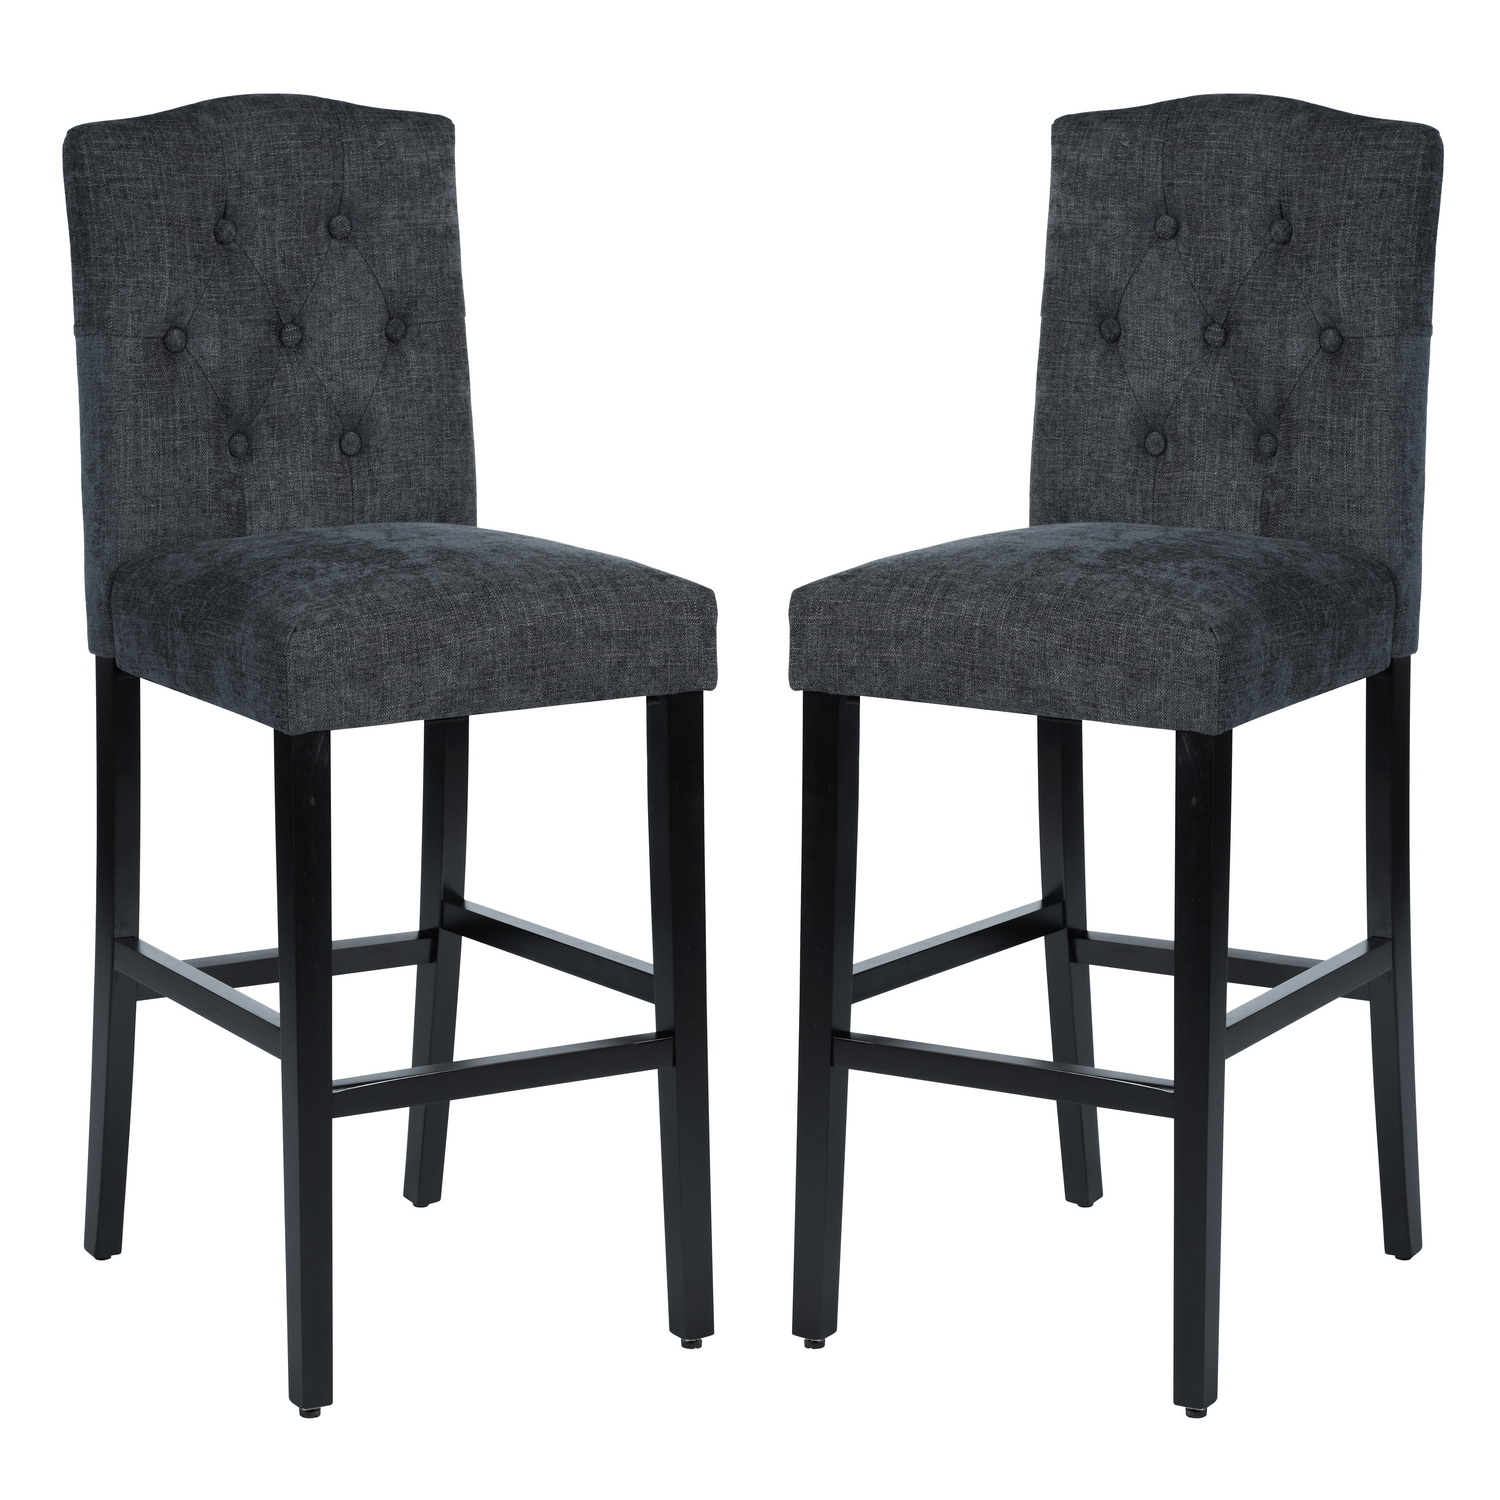 Set of 2 traditional Upholstered high stools, black